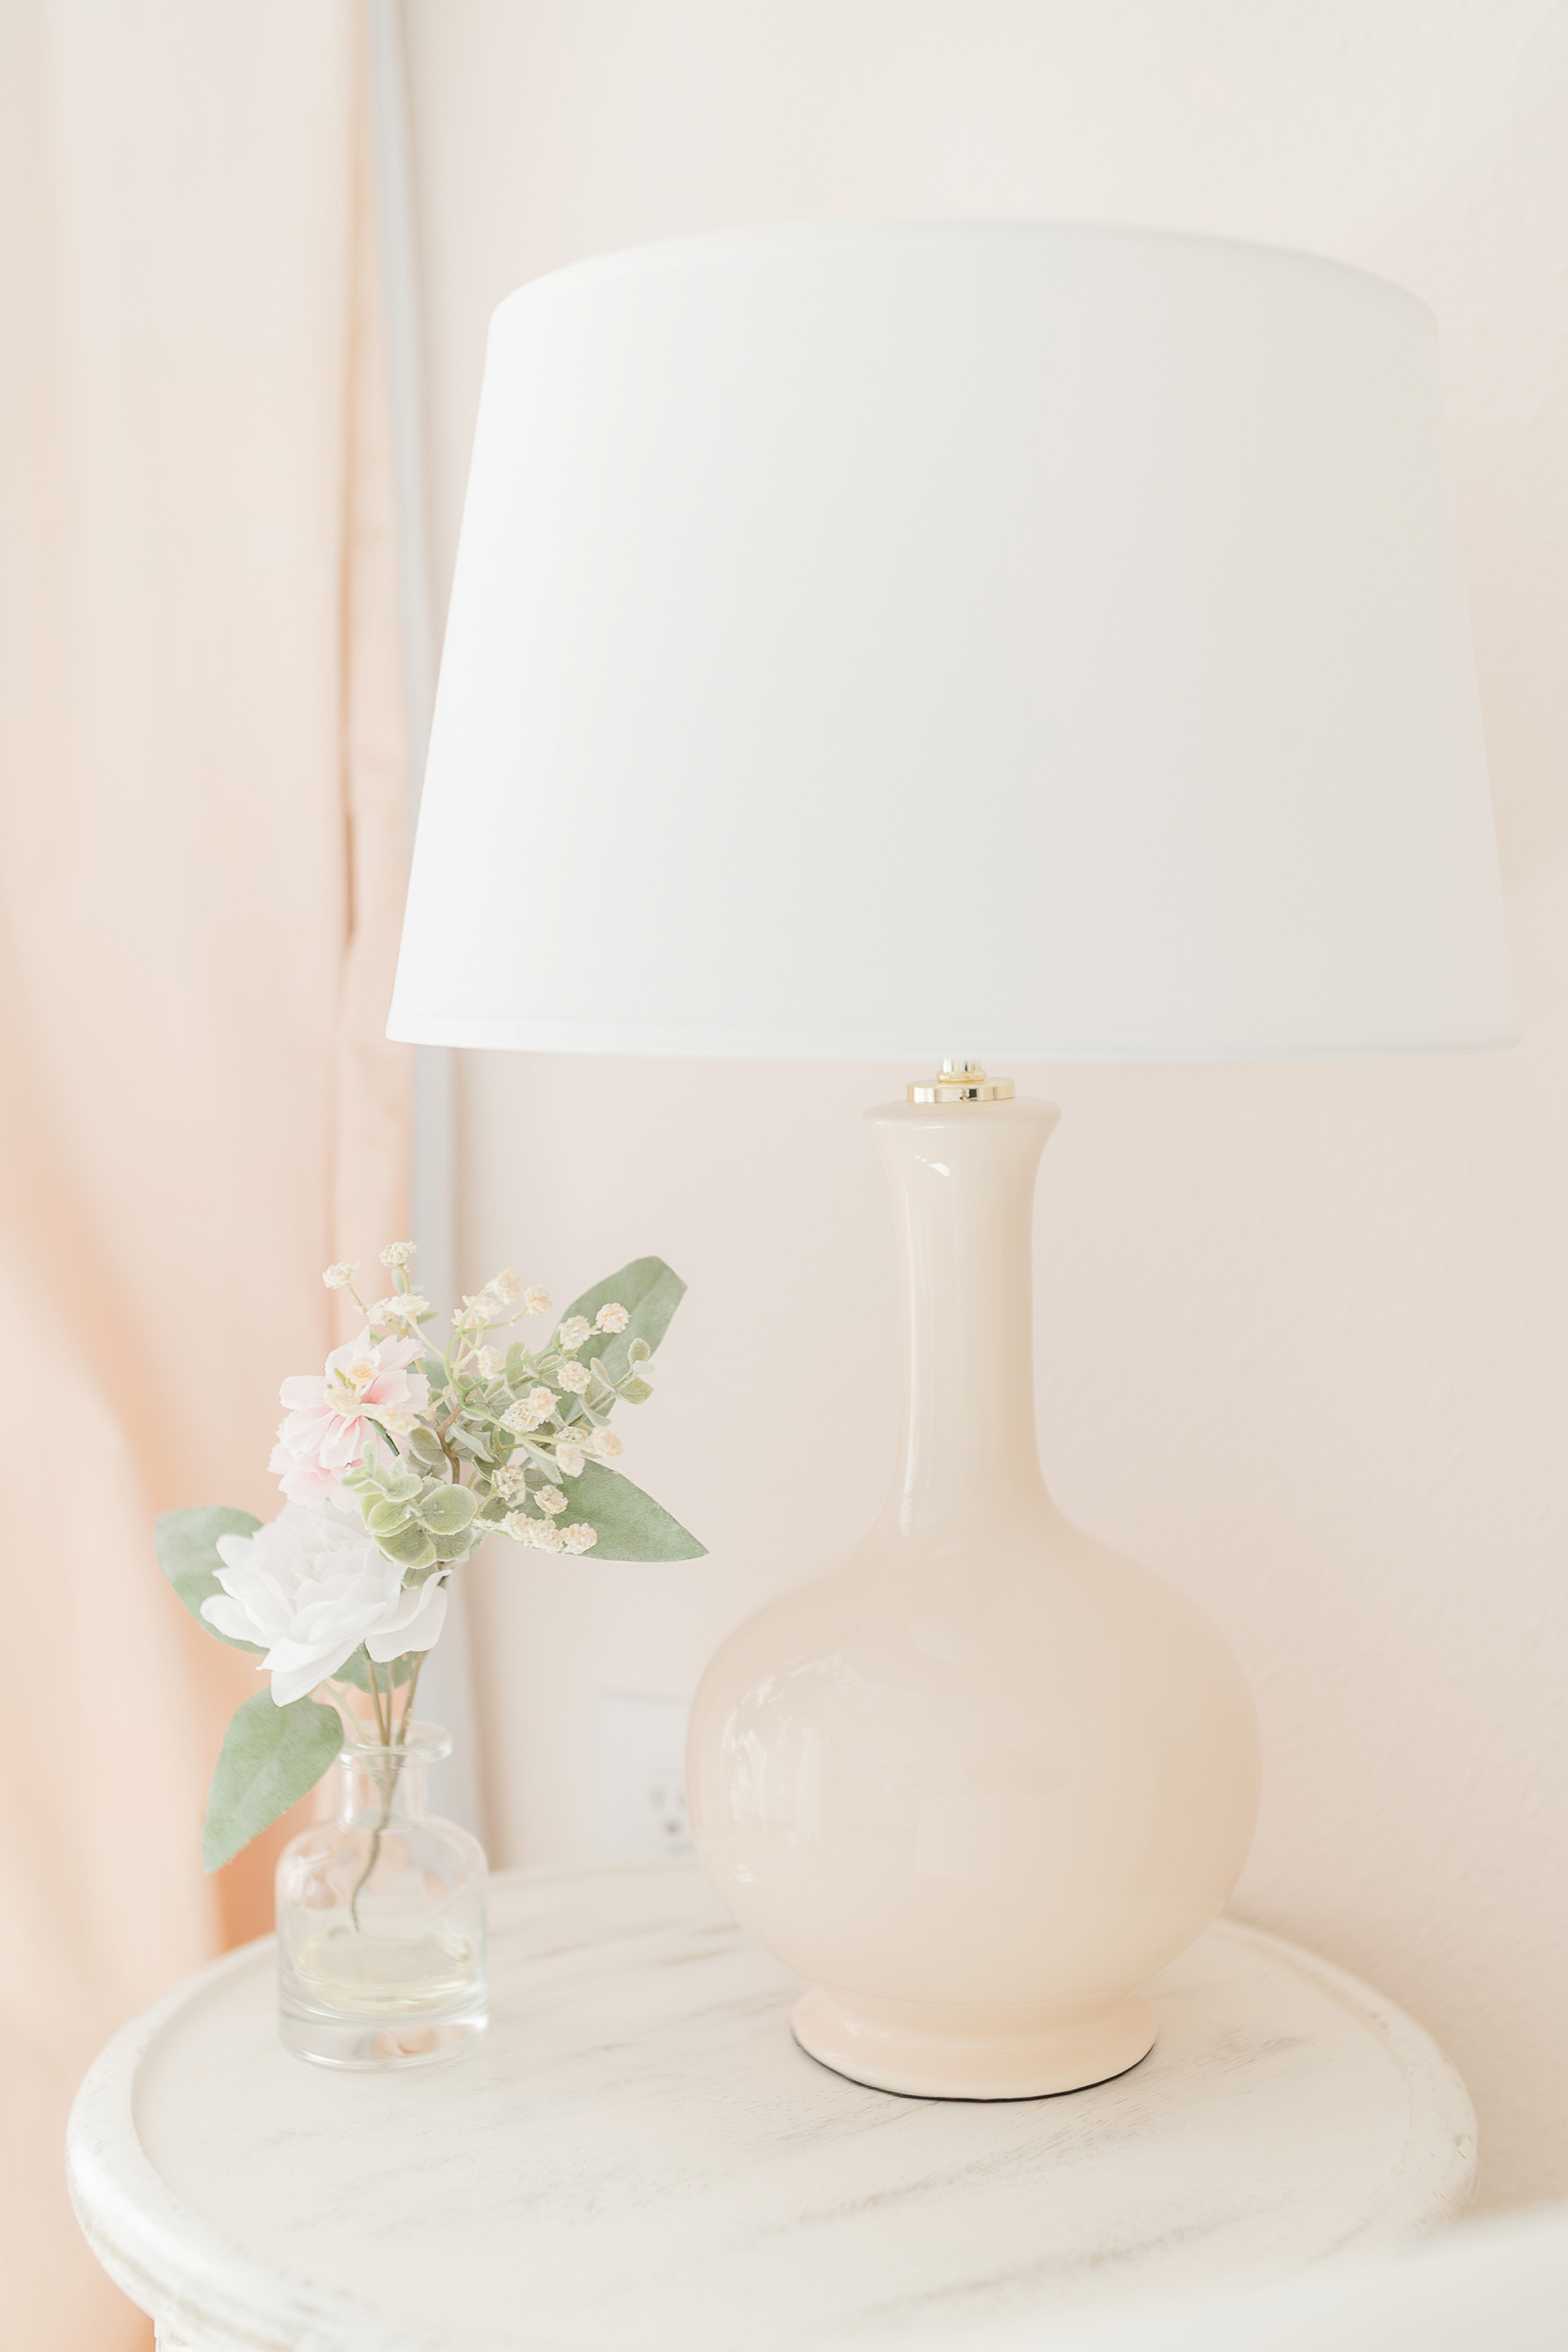 A pink detail nursery image of a lamp and side table in a newborn baby girl room.